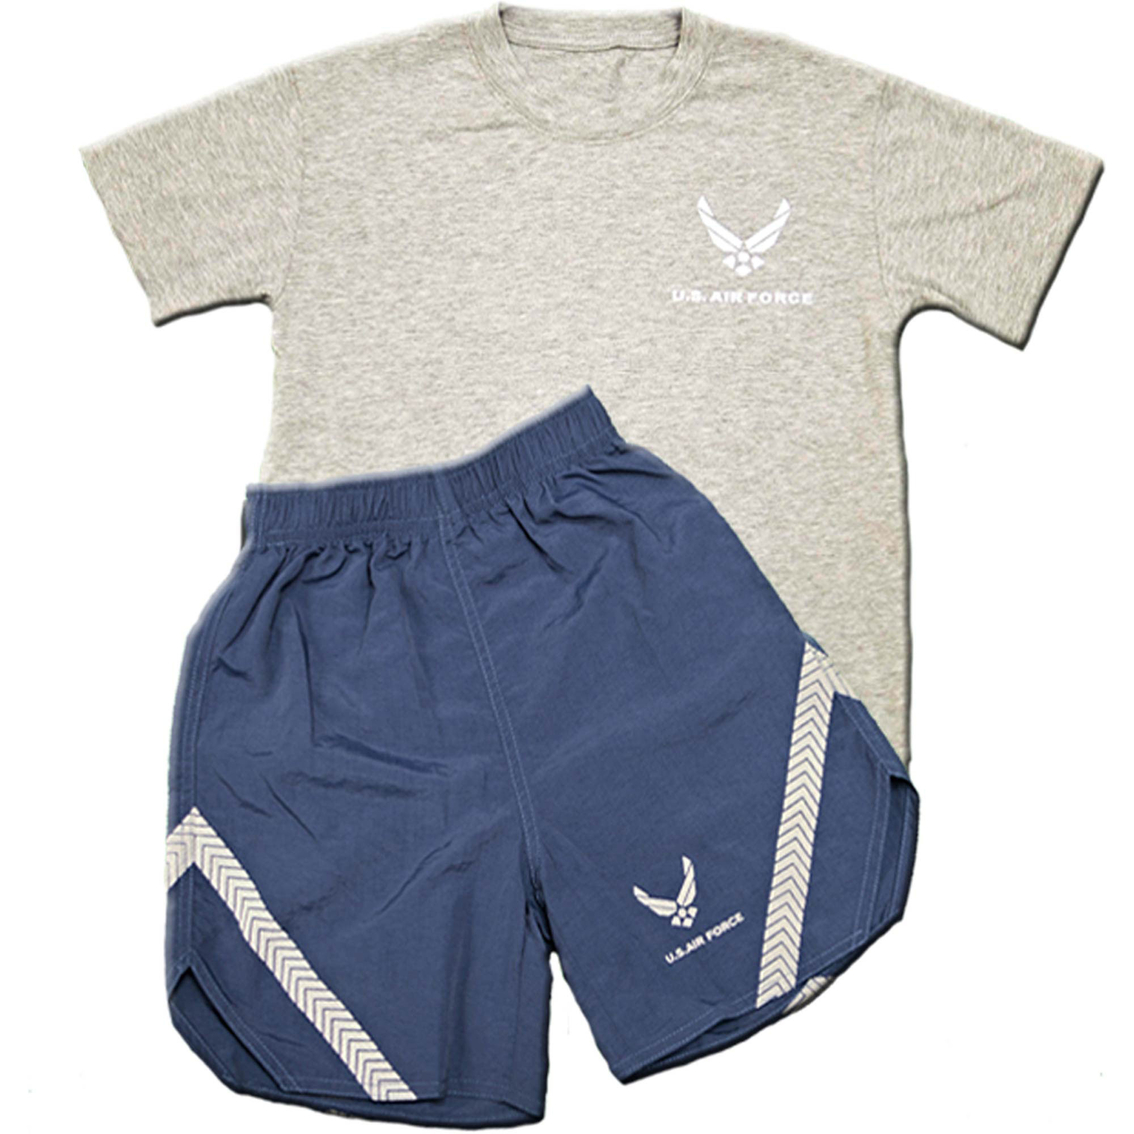 air force pt shorts by new balance